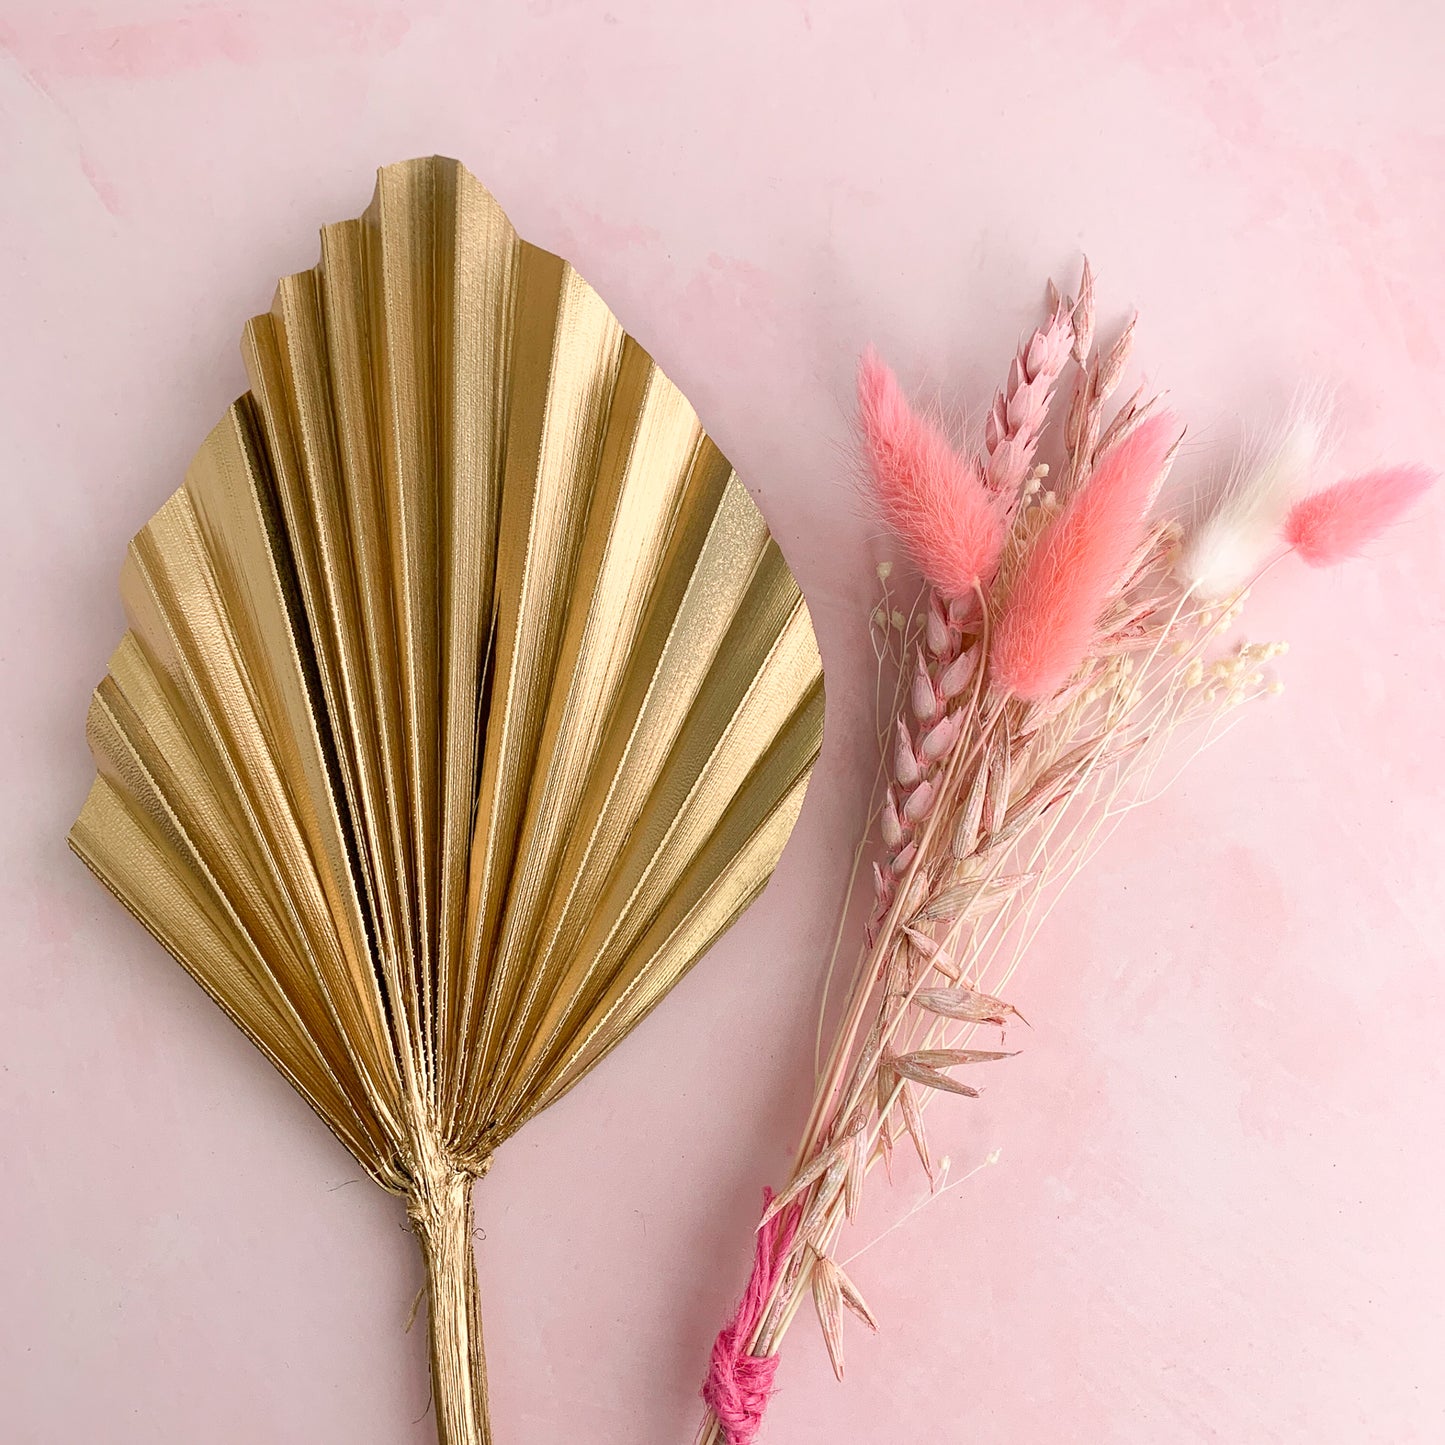 Gold and pink dried palm spear set - not so perfect